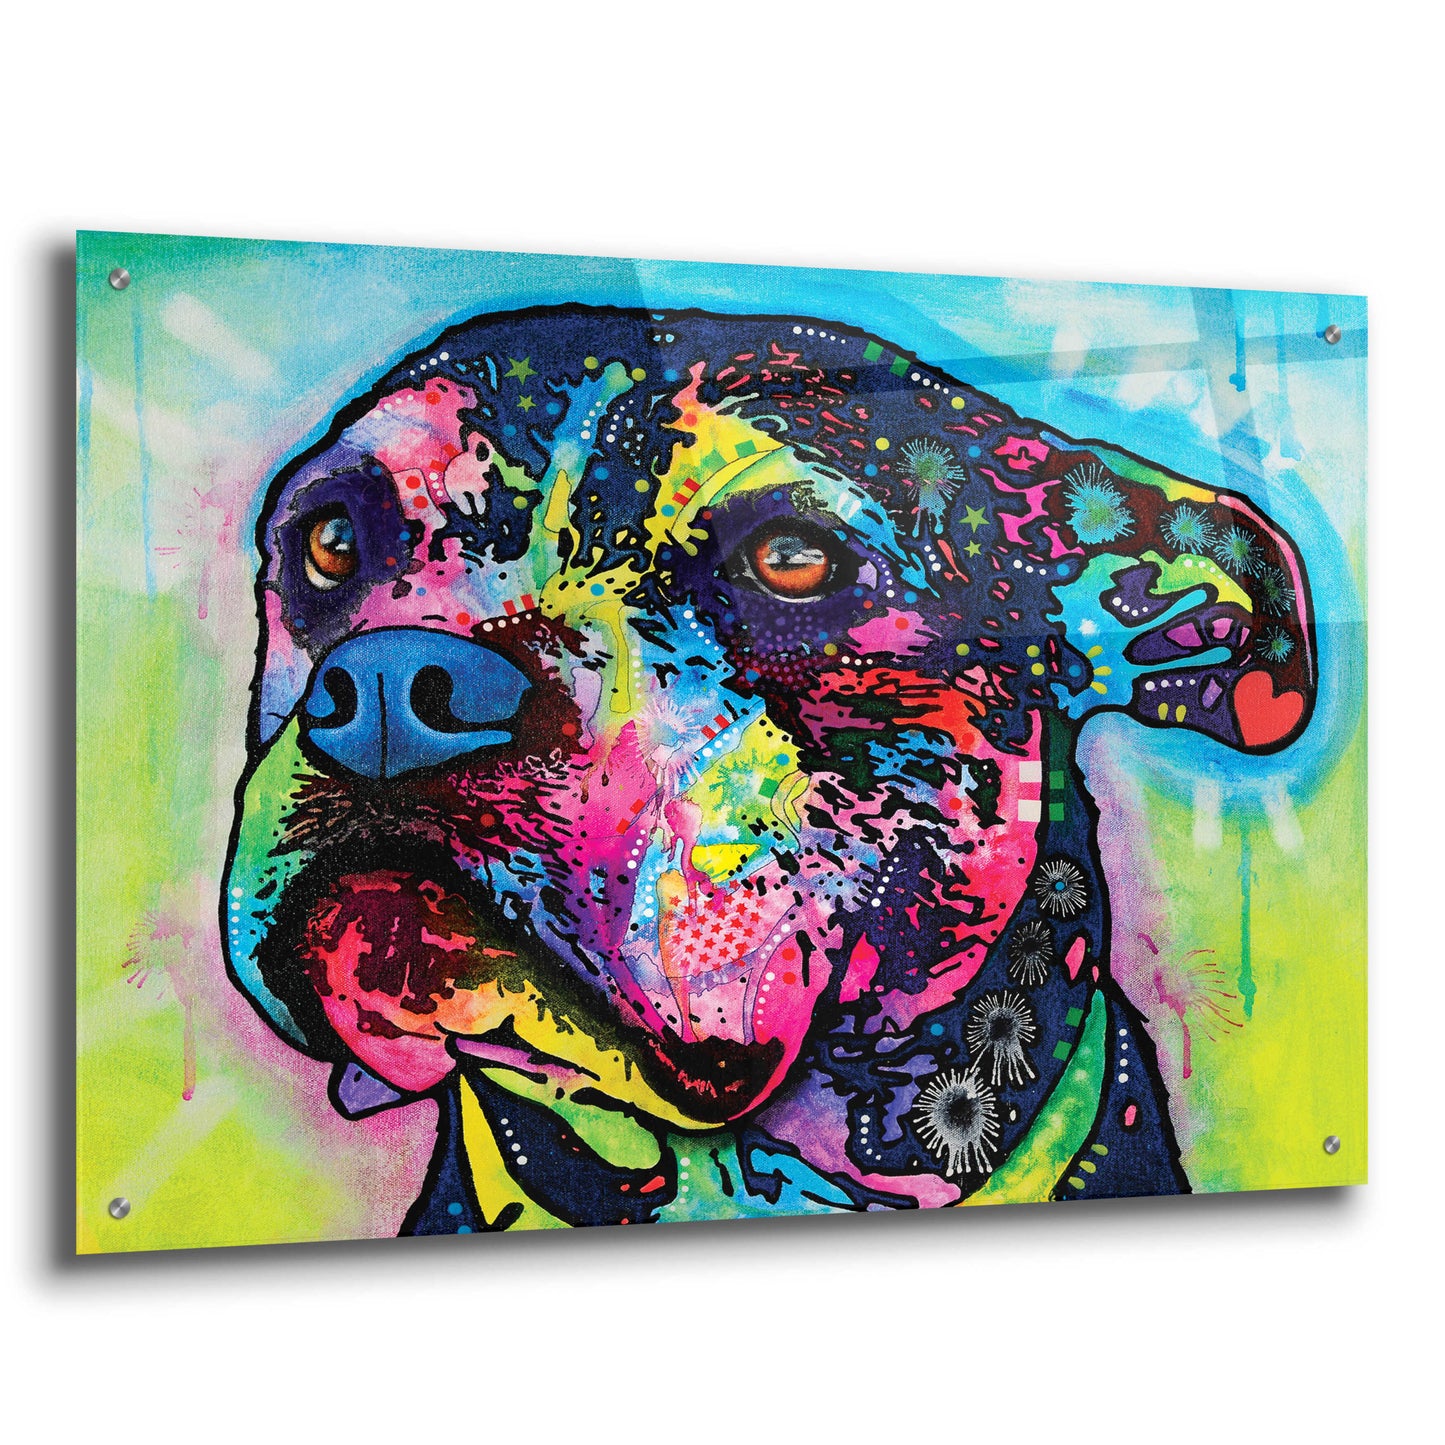 Epic Art 'Anni' by Dean Russo, Acrylic Glass Wall Art,36x24